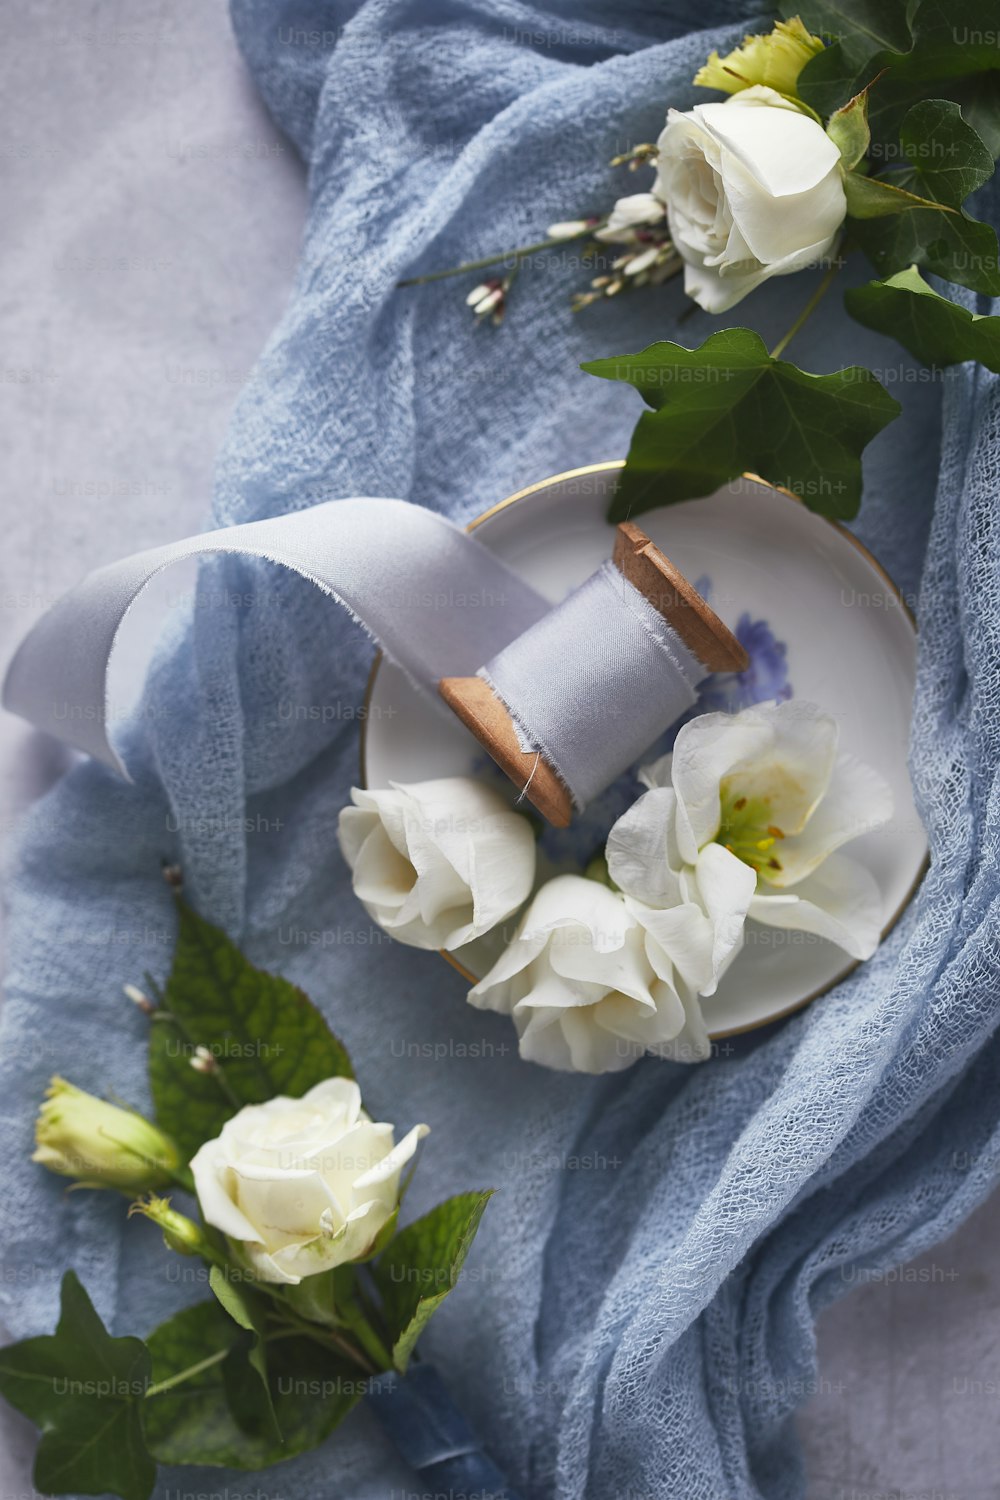 a plate with flowers and a roll of ribbon on it